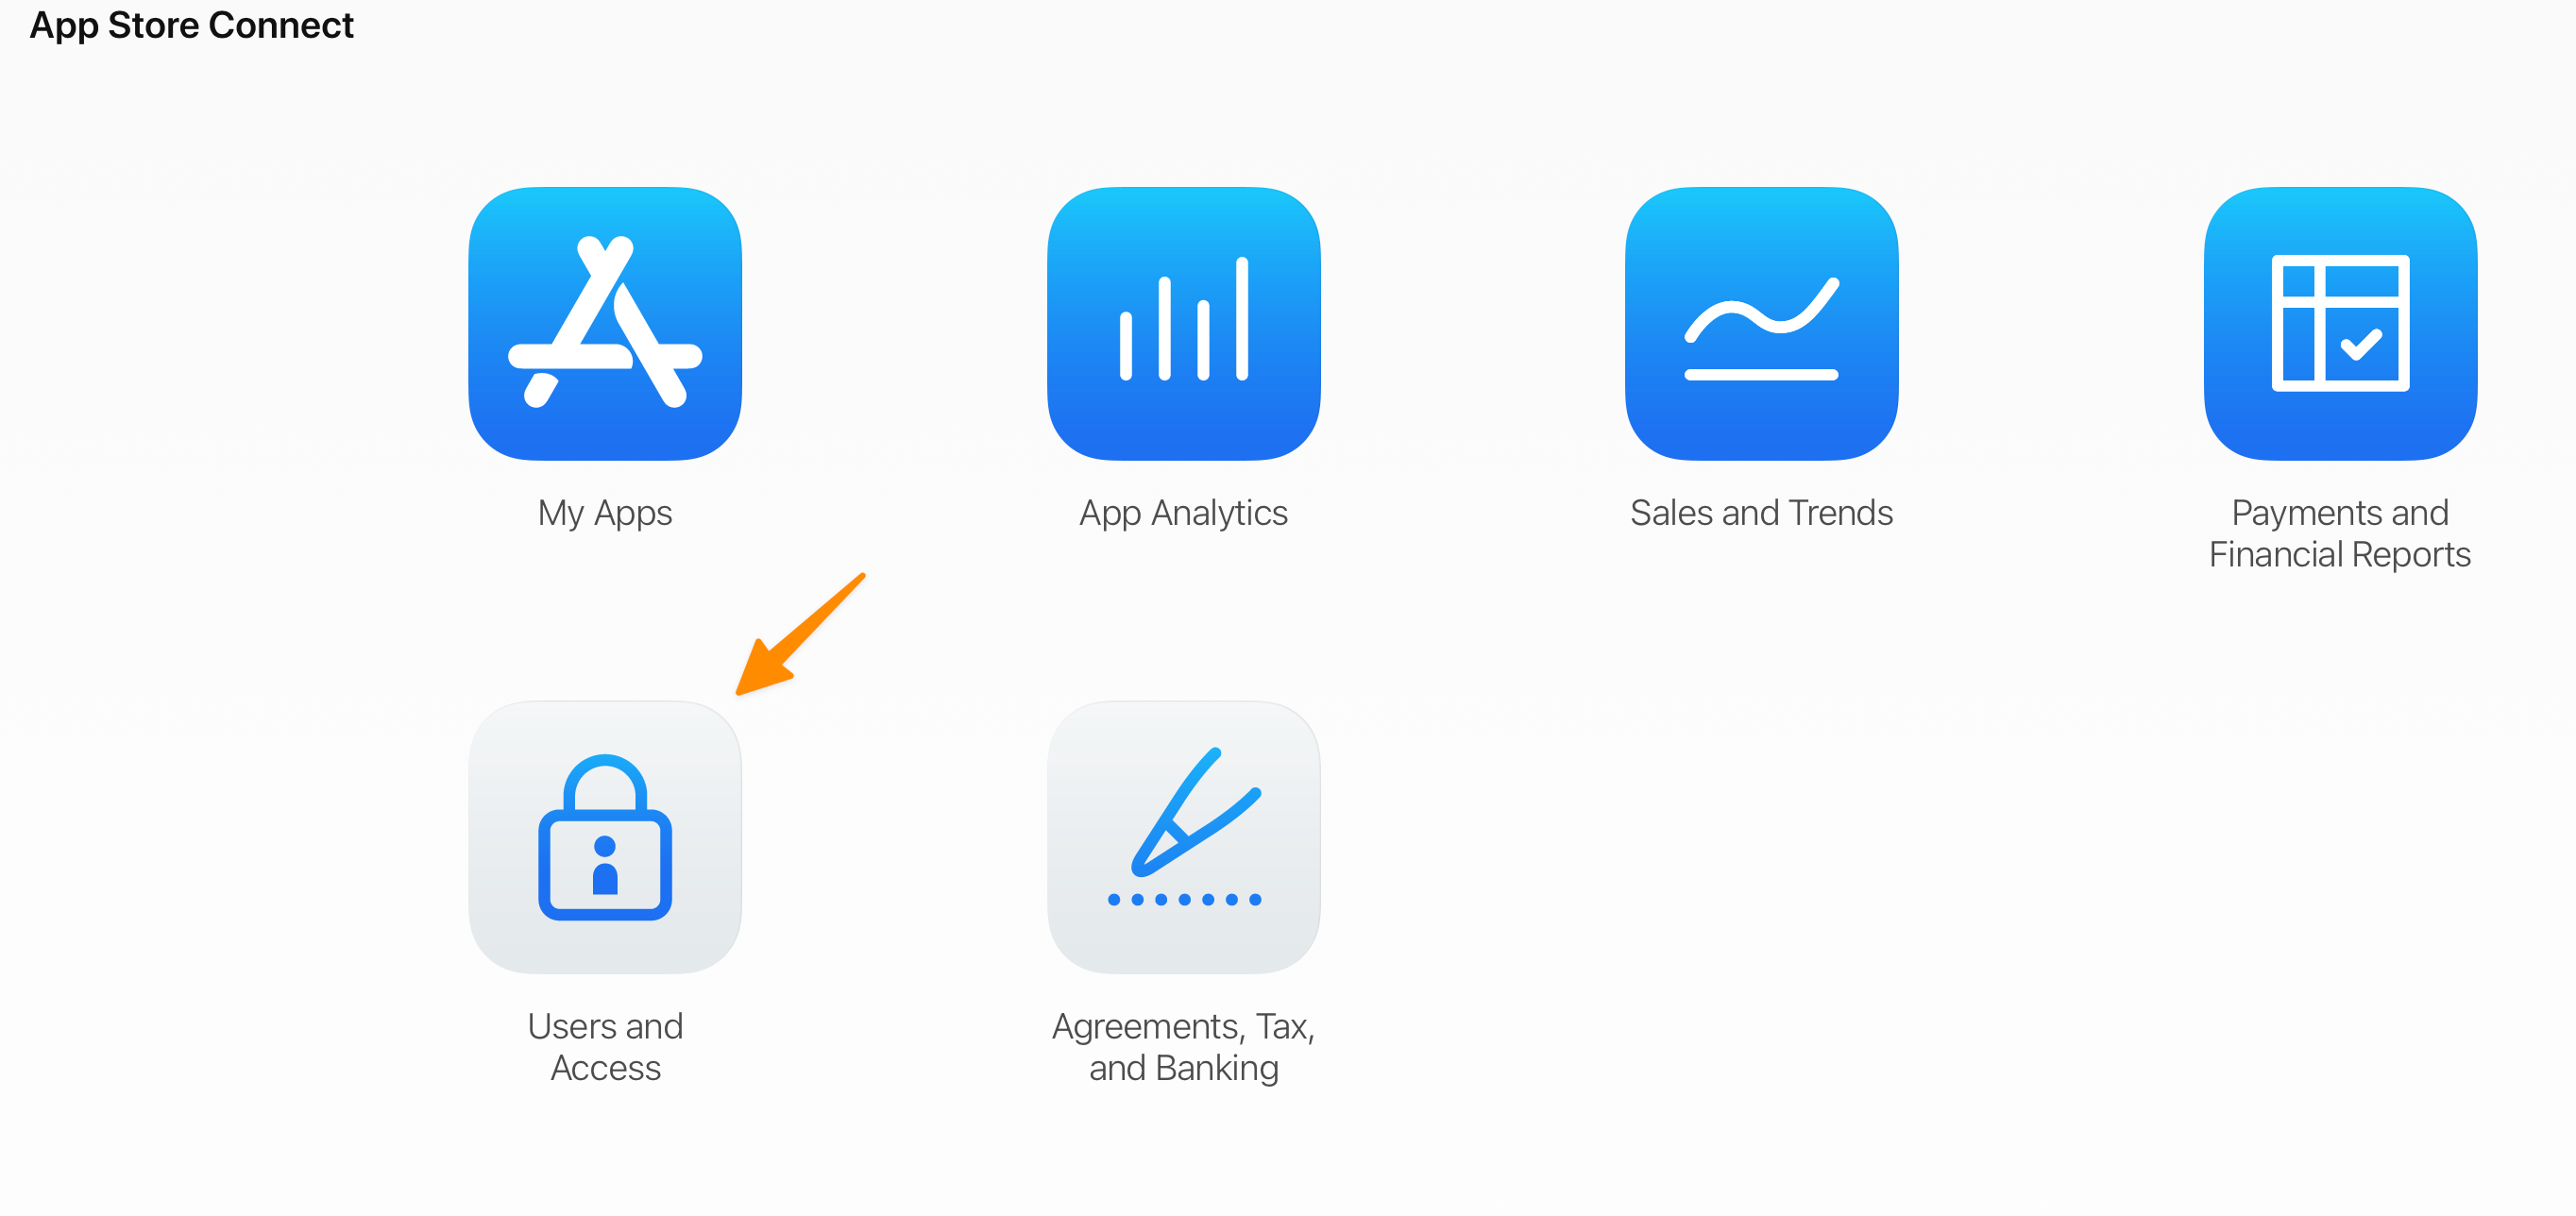 The App Store Connect dashboard page with an arrow pointing to the Users and Access section.